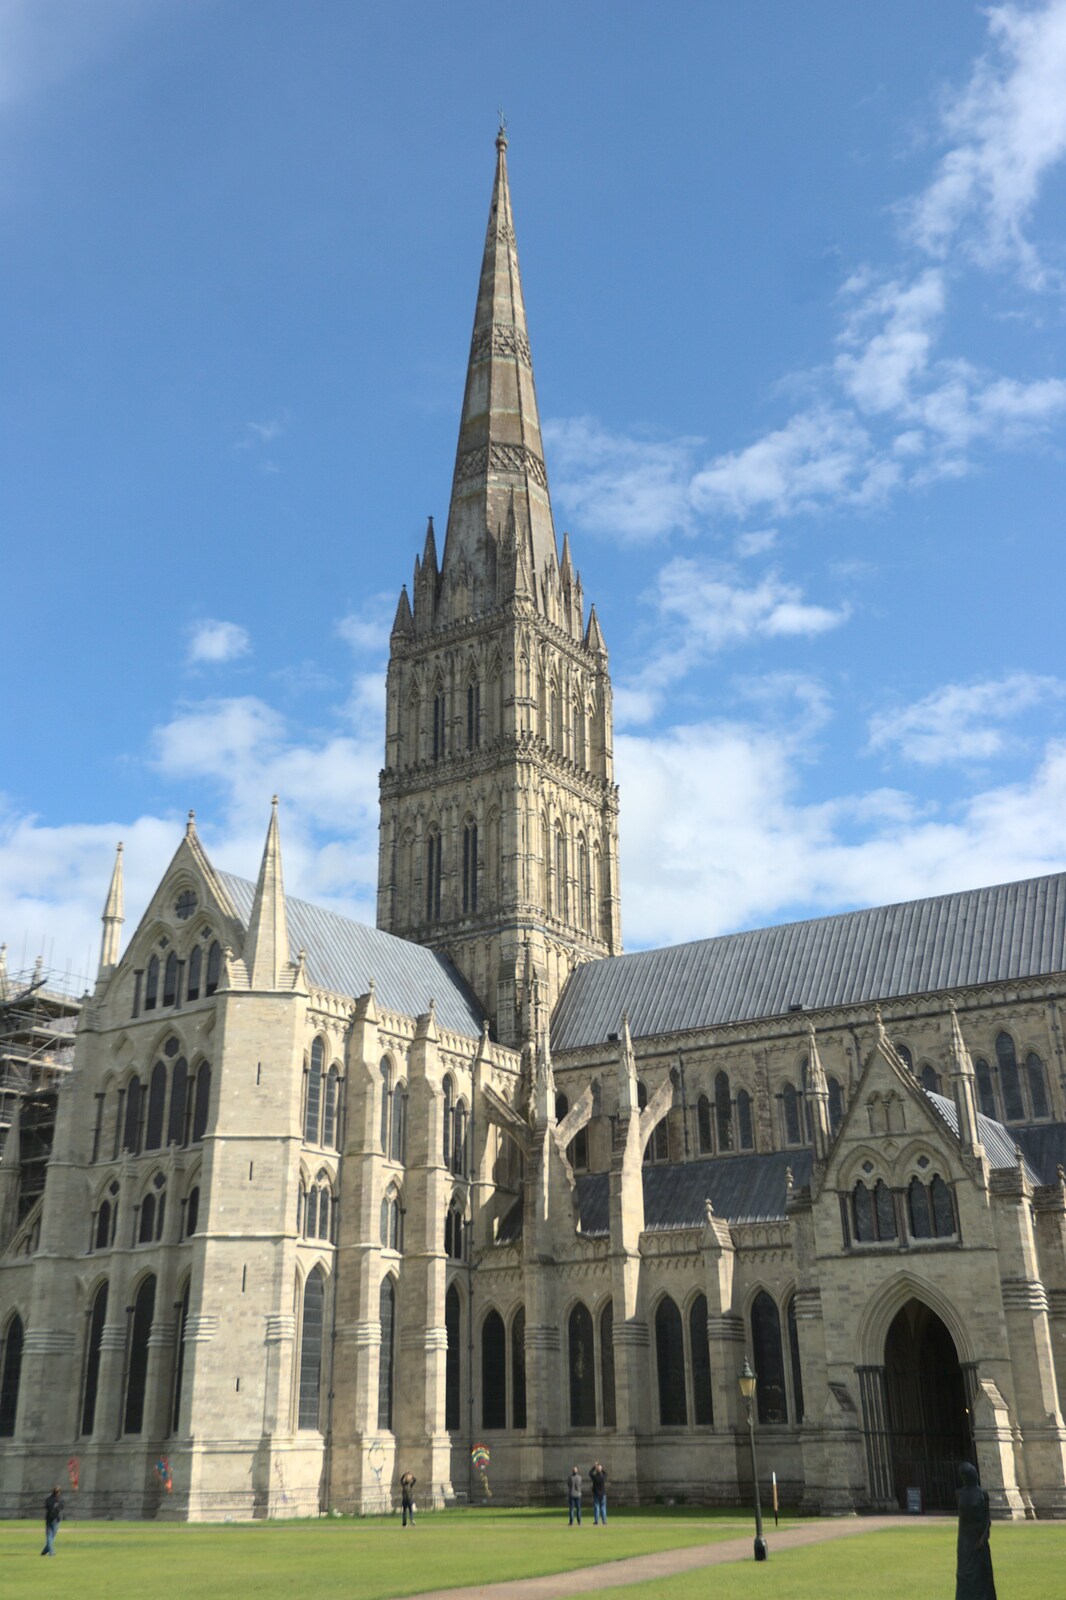 Salisbury Cathedral from A Camper Van Odyssey: Oxford, Salisbury, New Forest and Barton-on-Sea - 19th June 2011